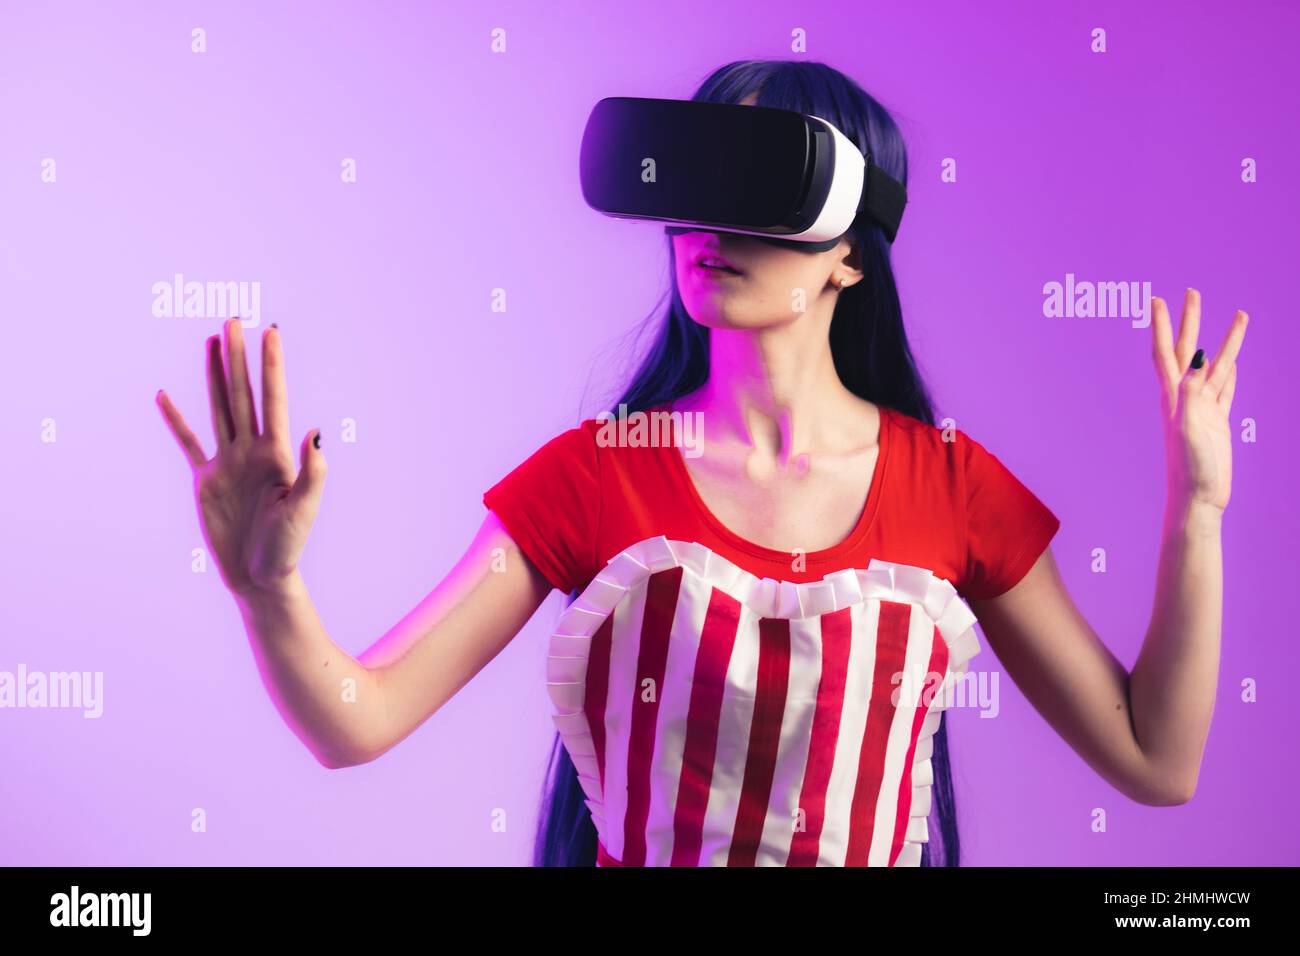 European model with long hair and vr glasses is rising her hands medium studio shot magenta background. High quality photo Stock Photo